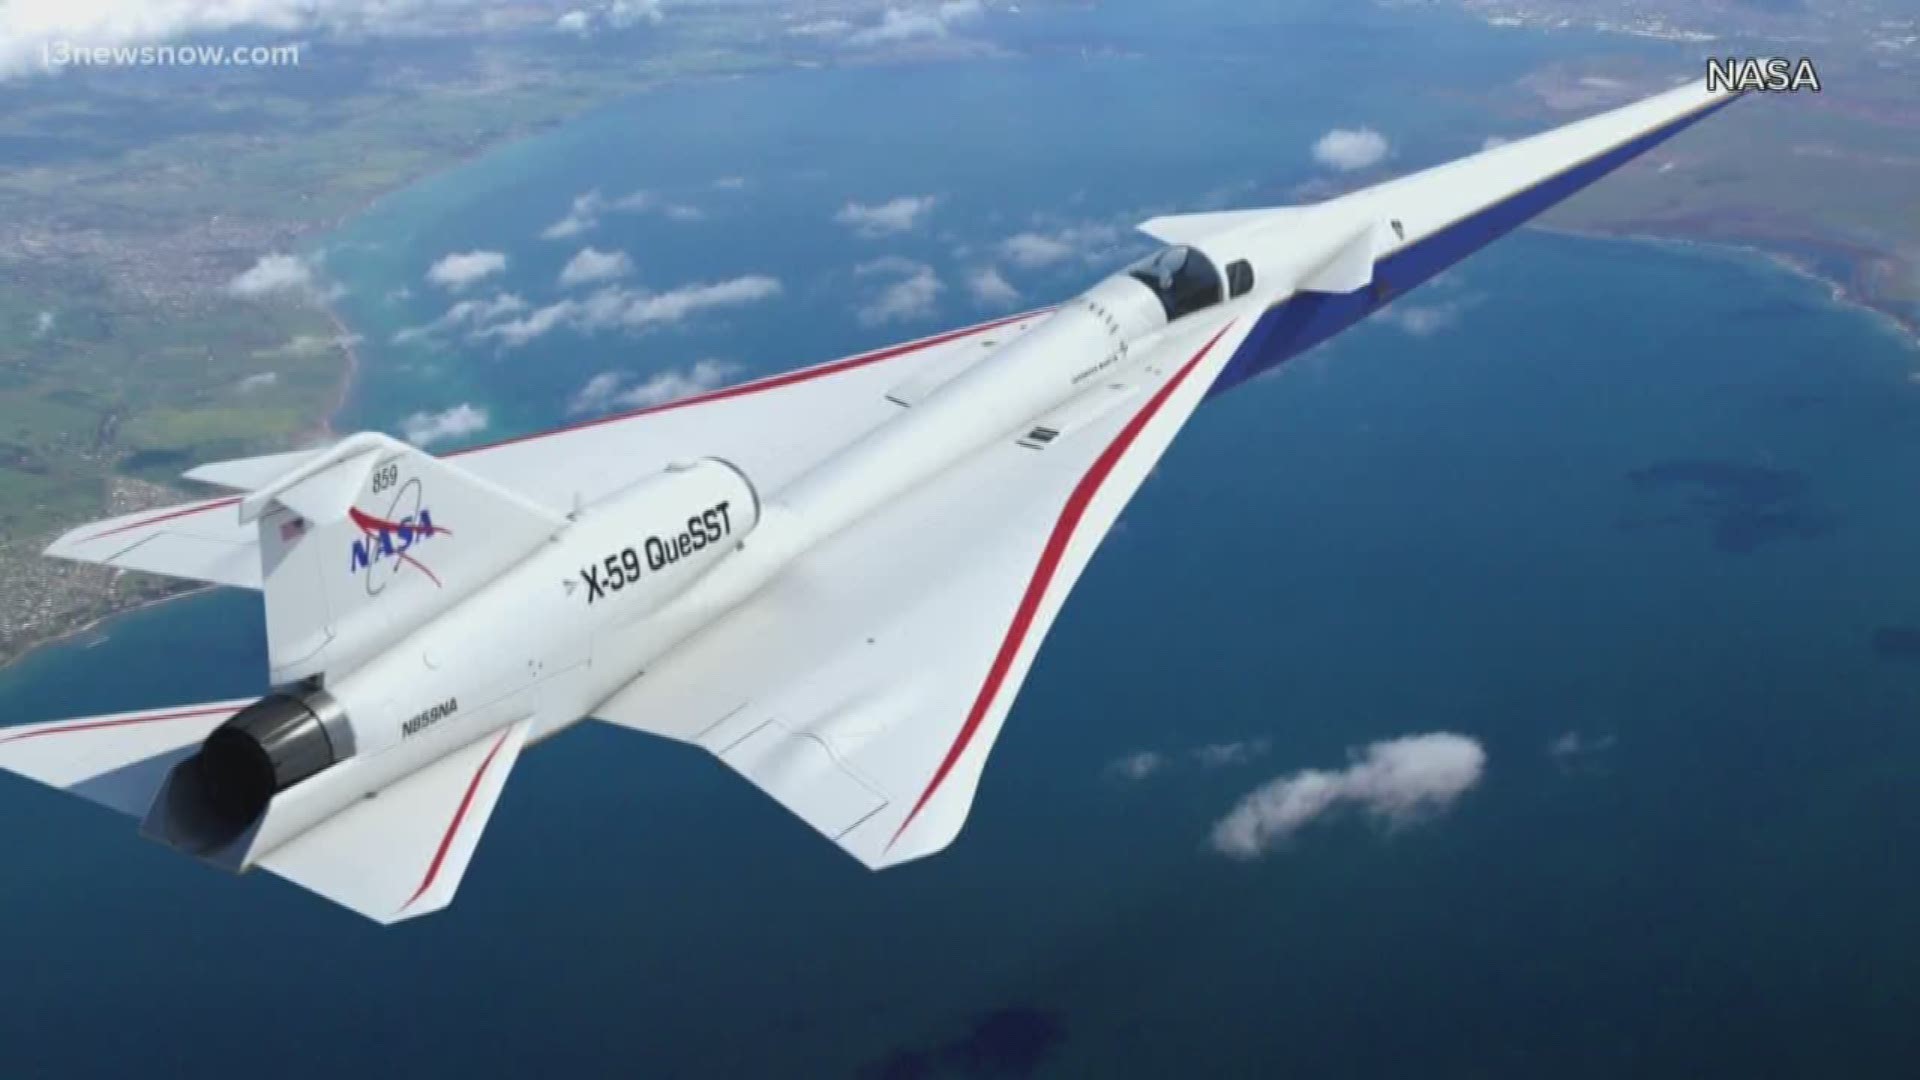 NASA is working on quieting the big, annoying sounds of sonic booms.